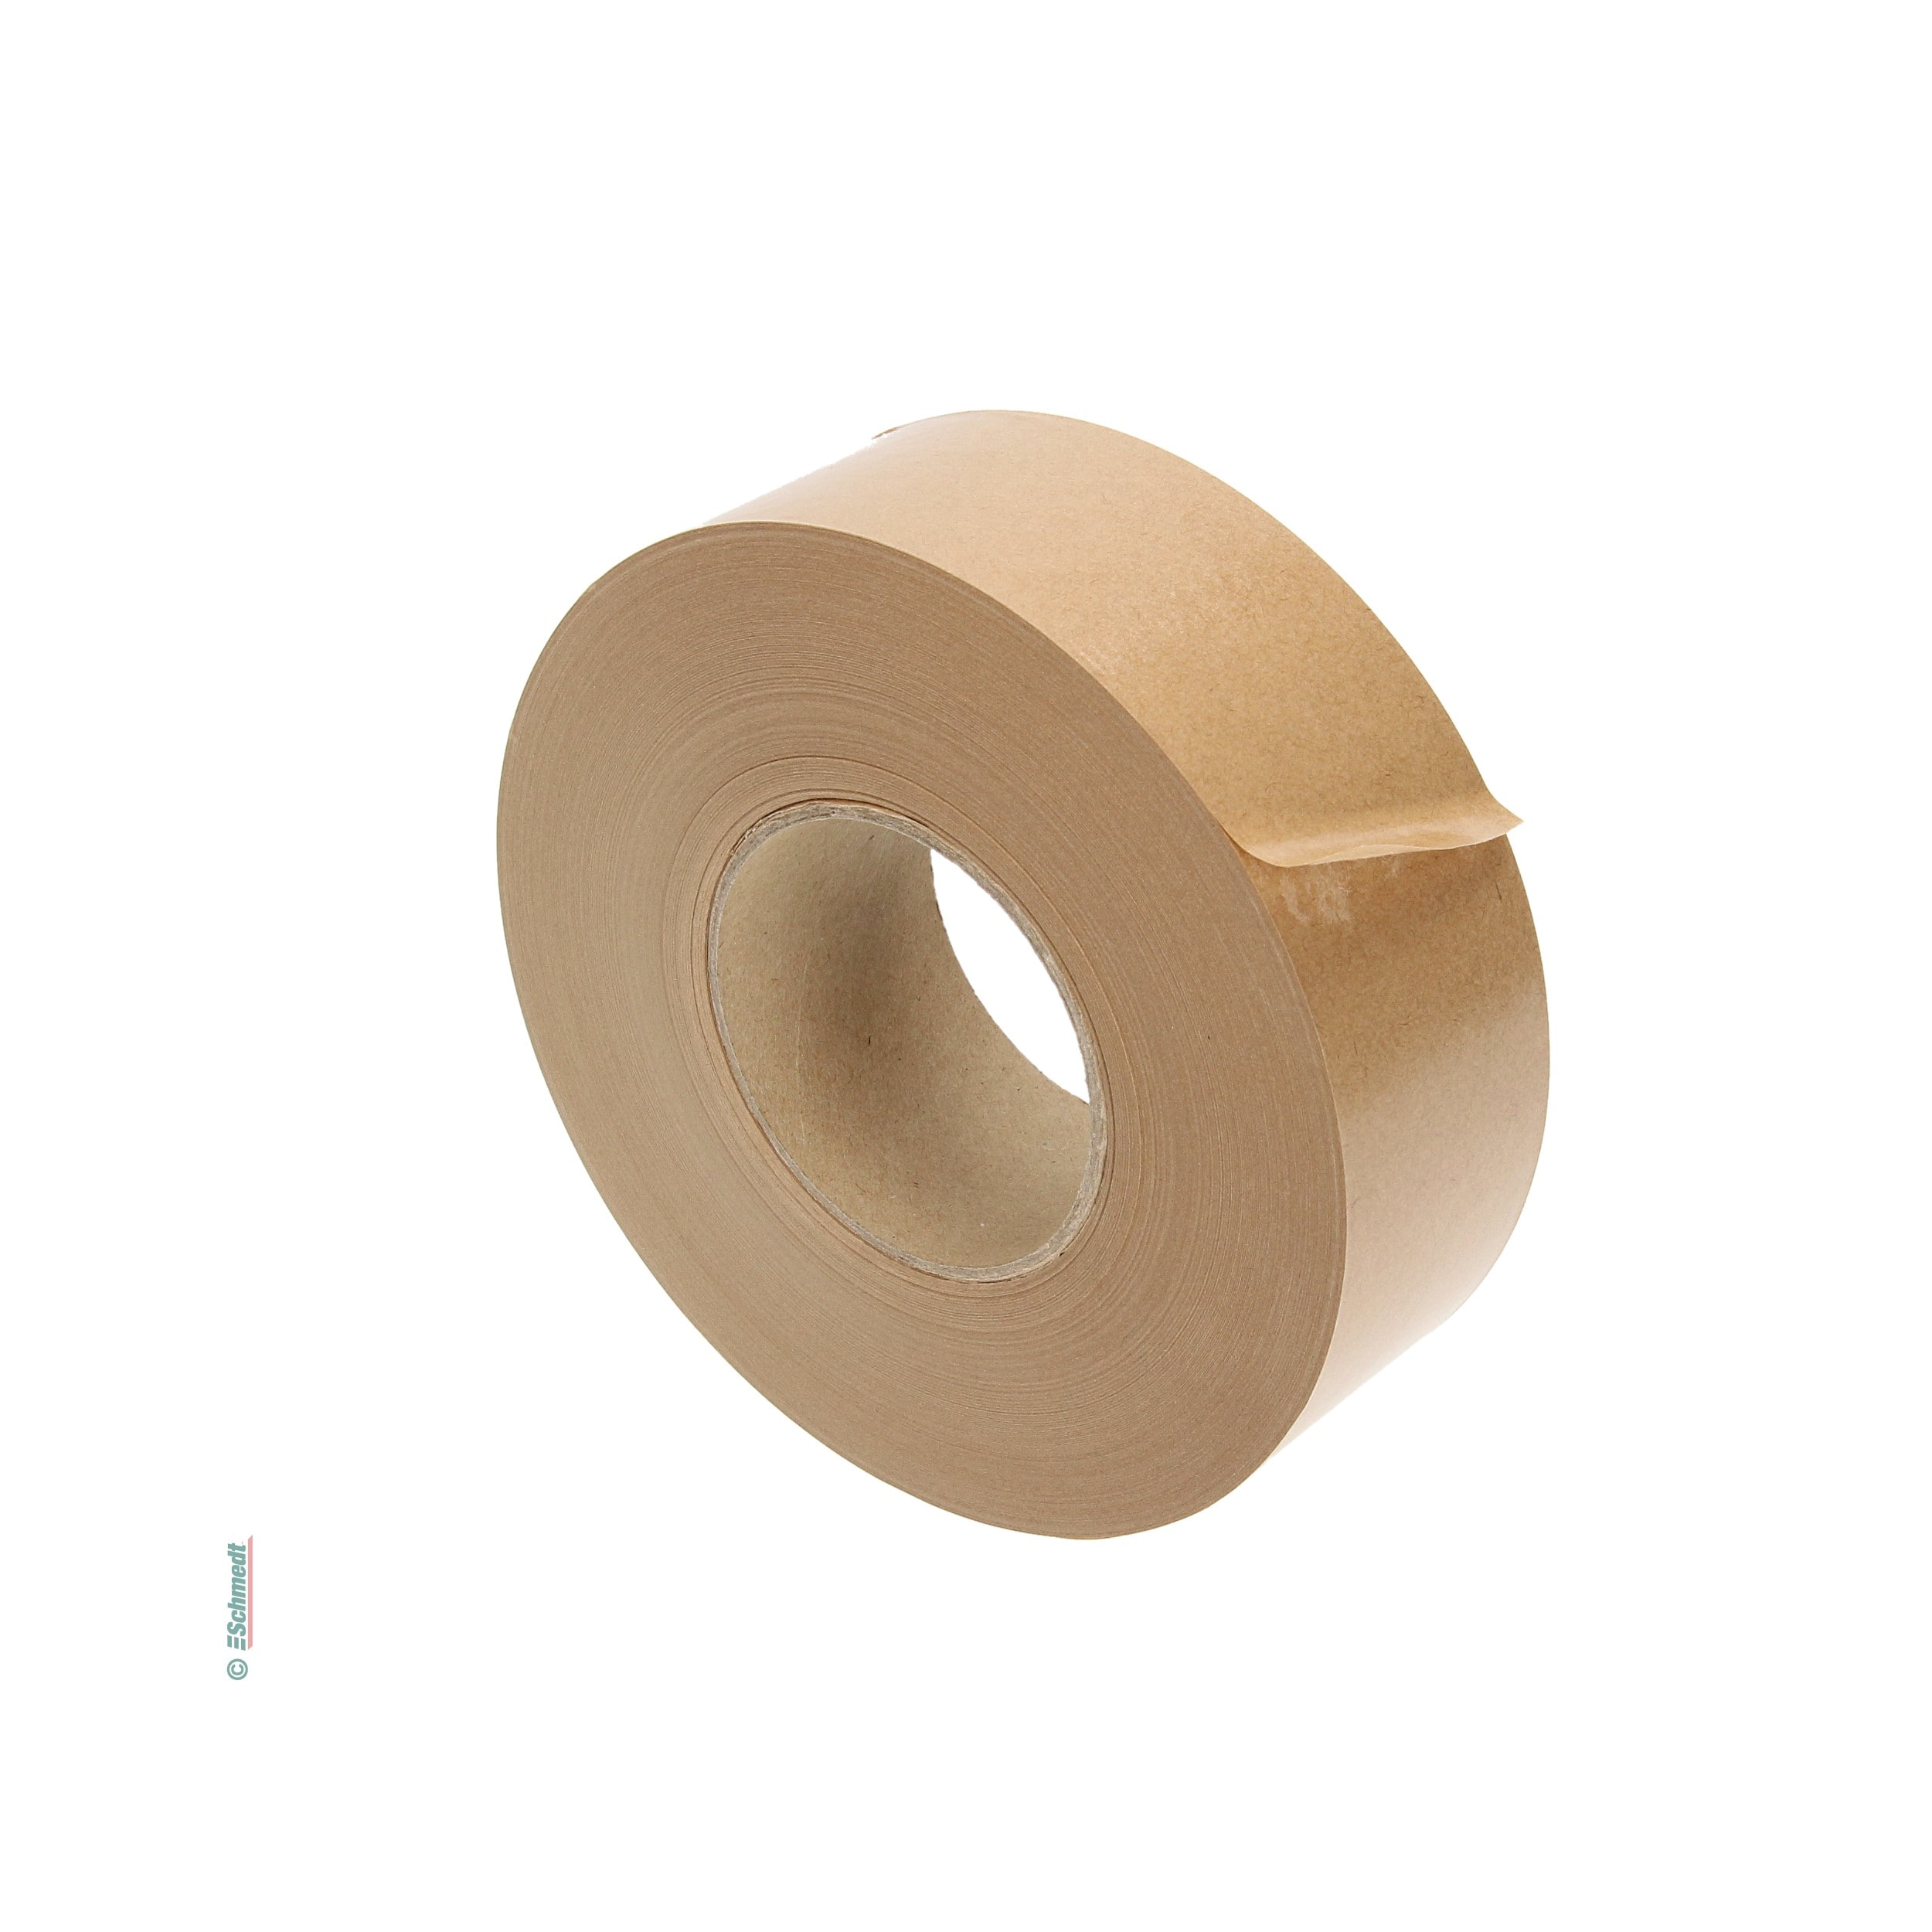 Gummed tape, light brown - packaging tape for remoistening - for strong sealing of cardboard boxes...